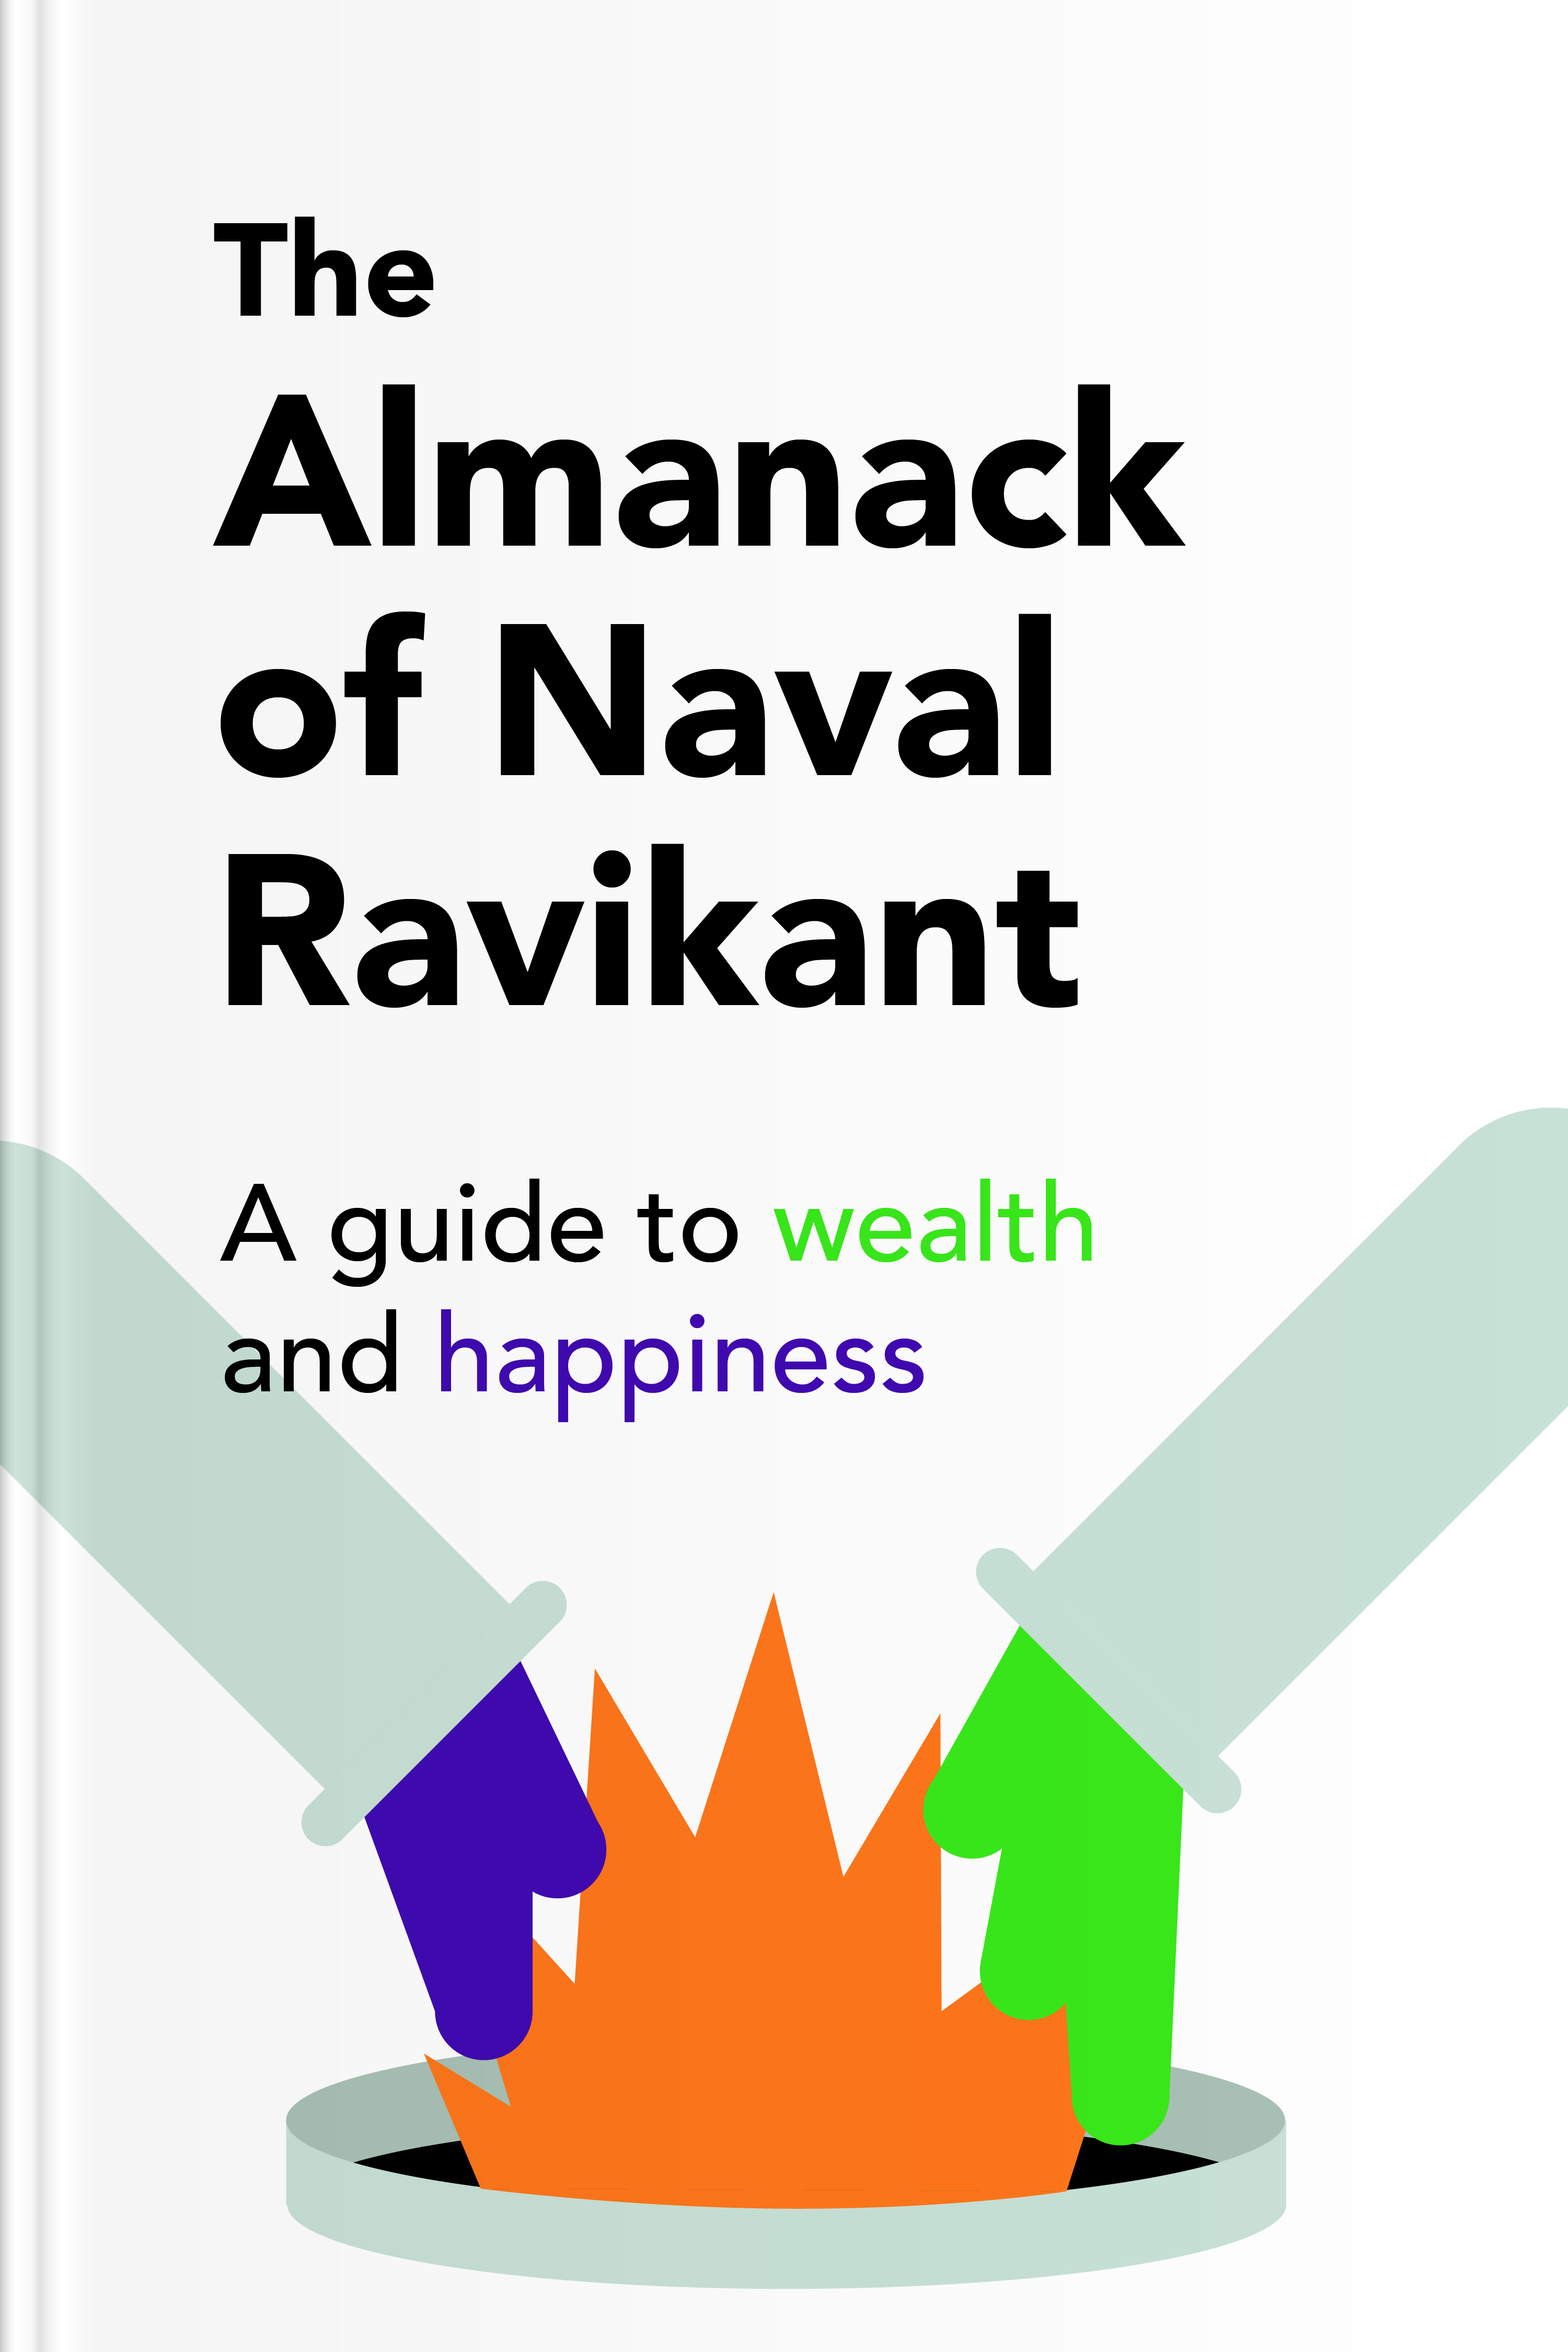 The Almanack of Naval Ravikant by Eric Jorgenson ~ 8 minute read